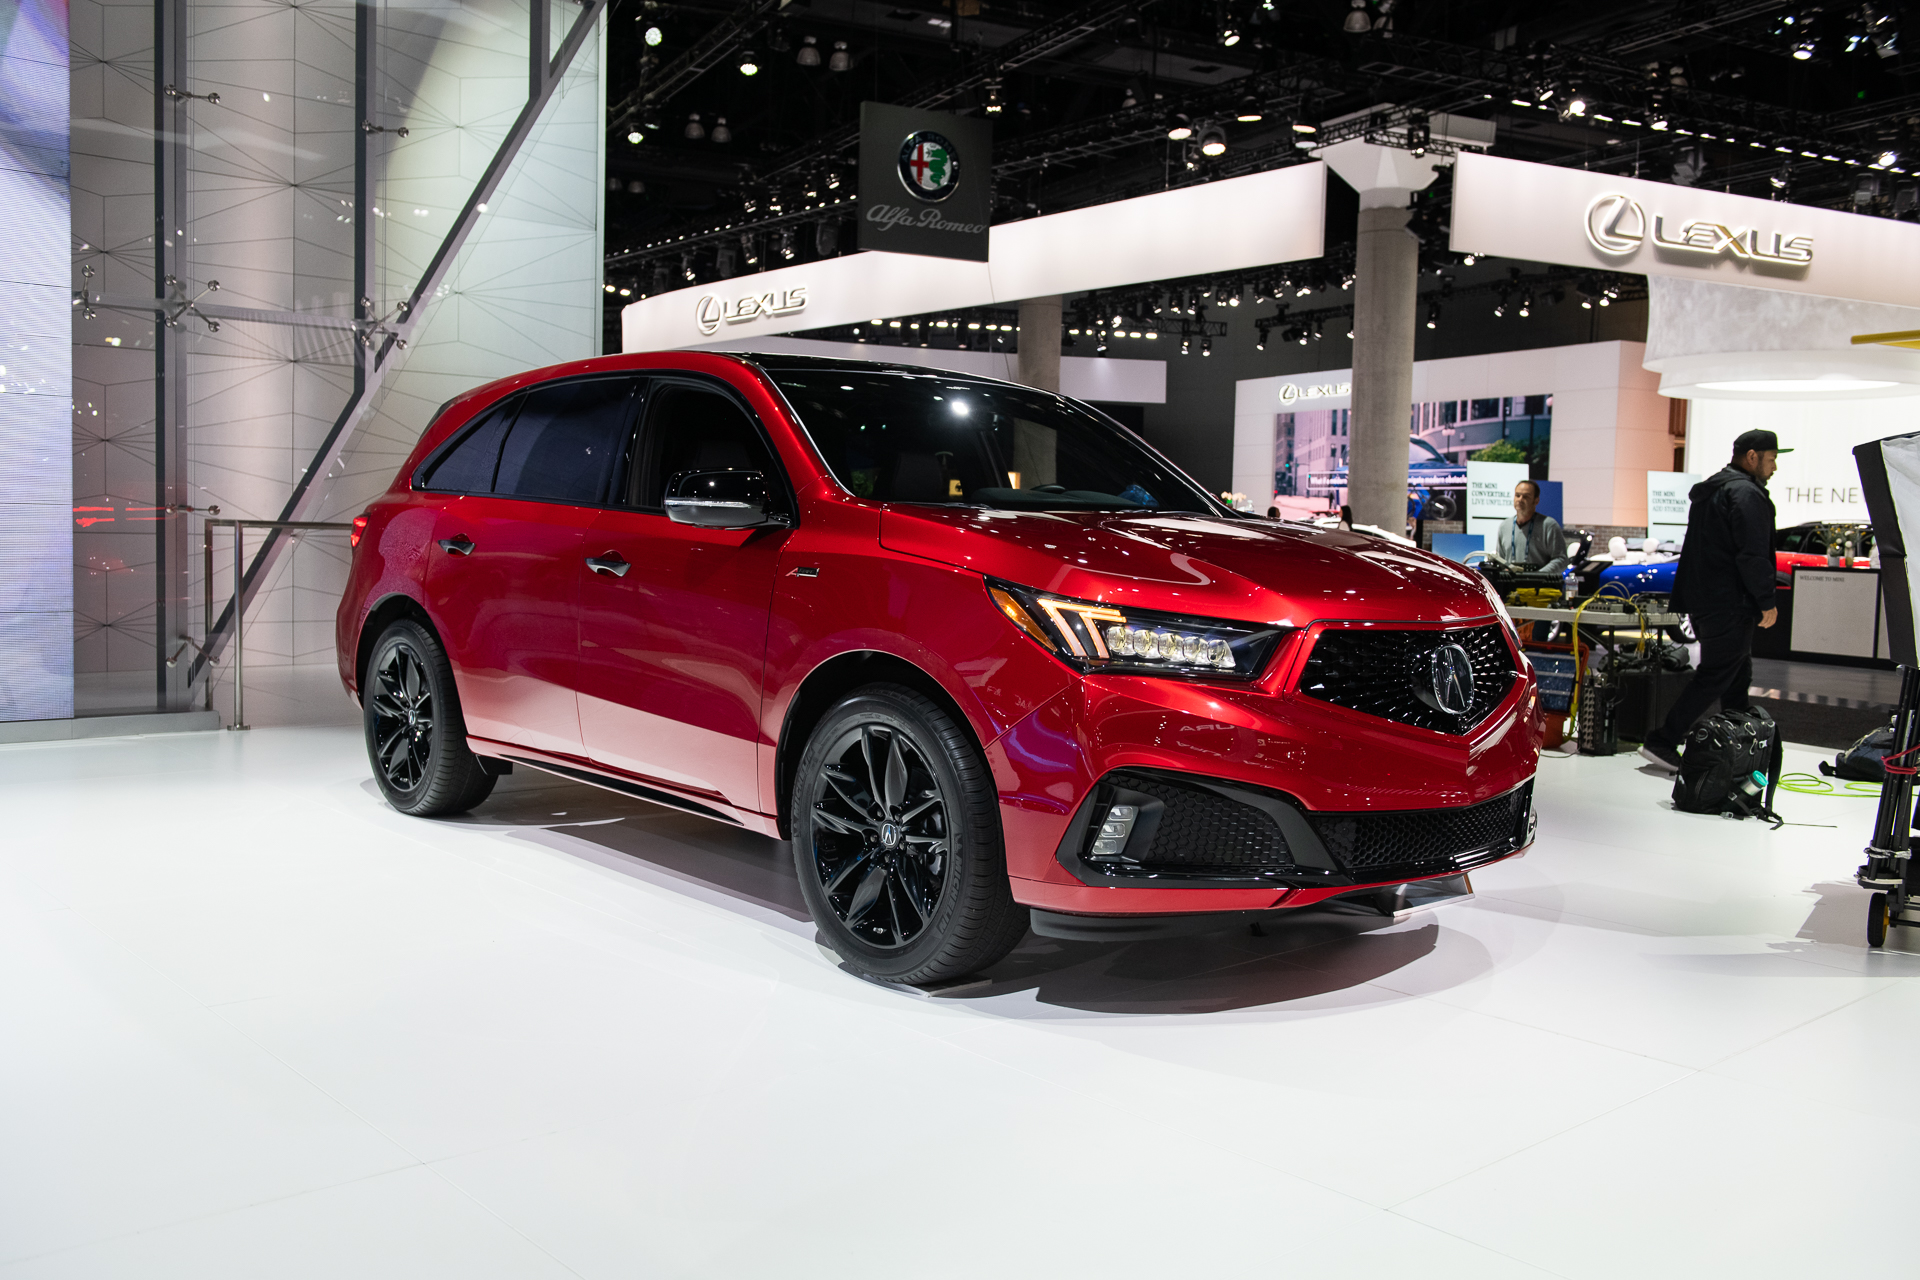 2020 Acura Mdx Pmc Edition Strikes A Value But Limited To Just 330